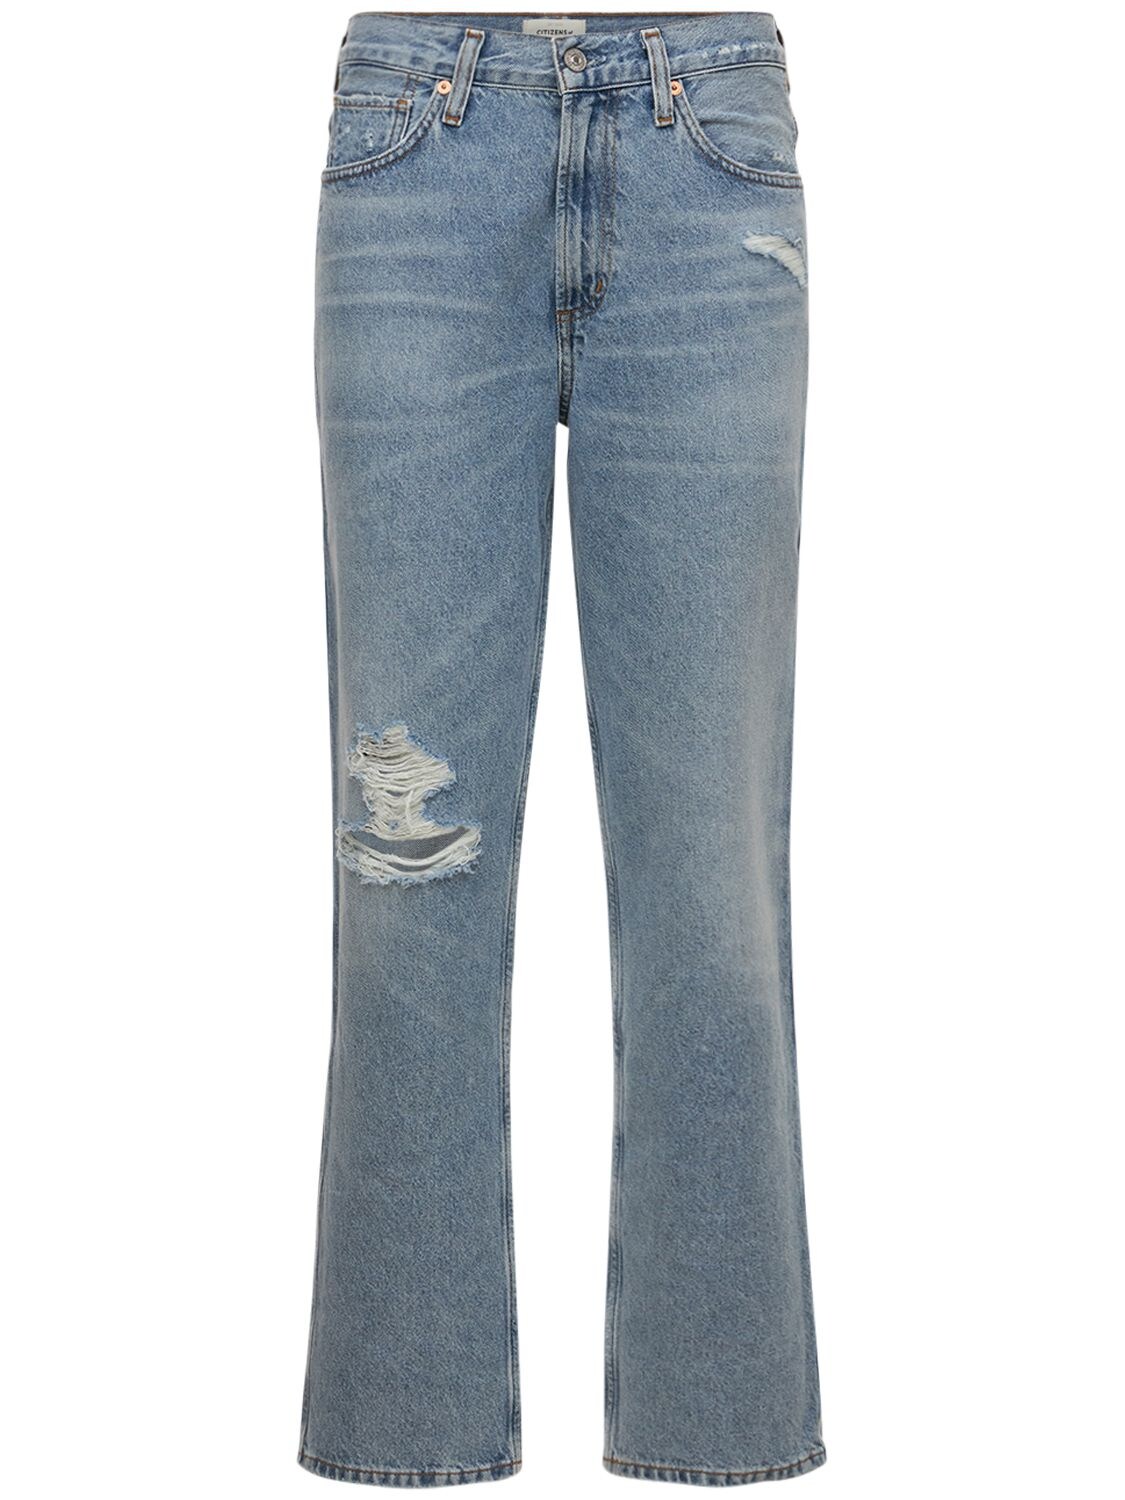 Daphne High Rise Stovepipe Denim Jeans - CITIZENS OF HUMANITY - Modalova